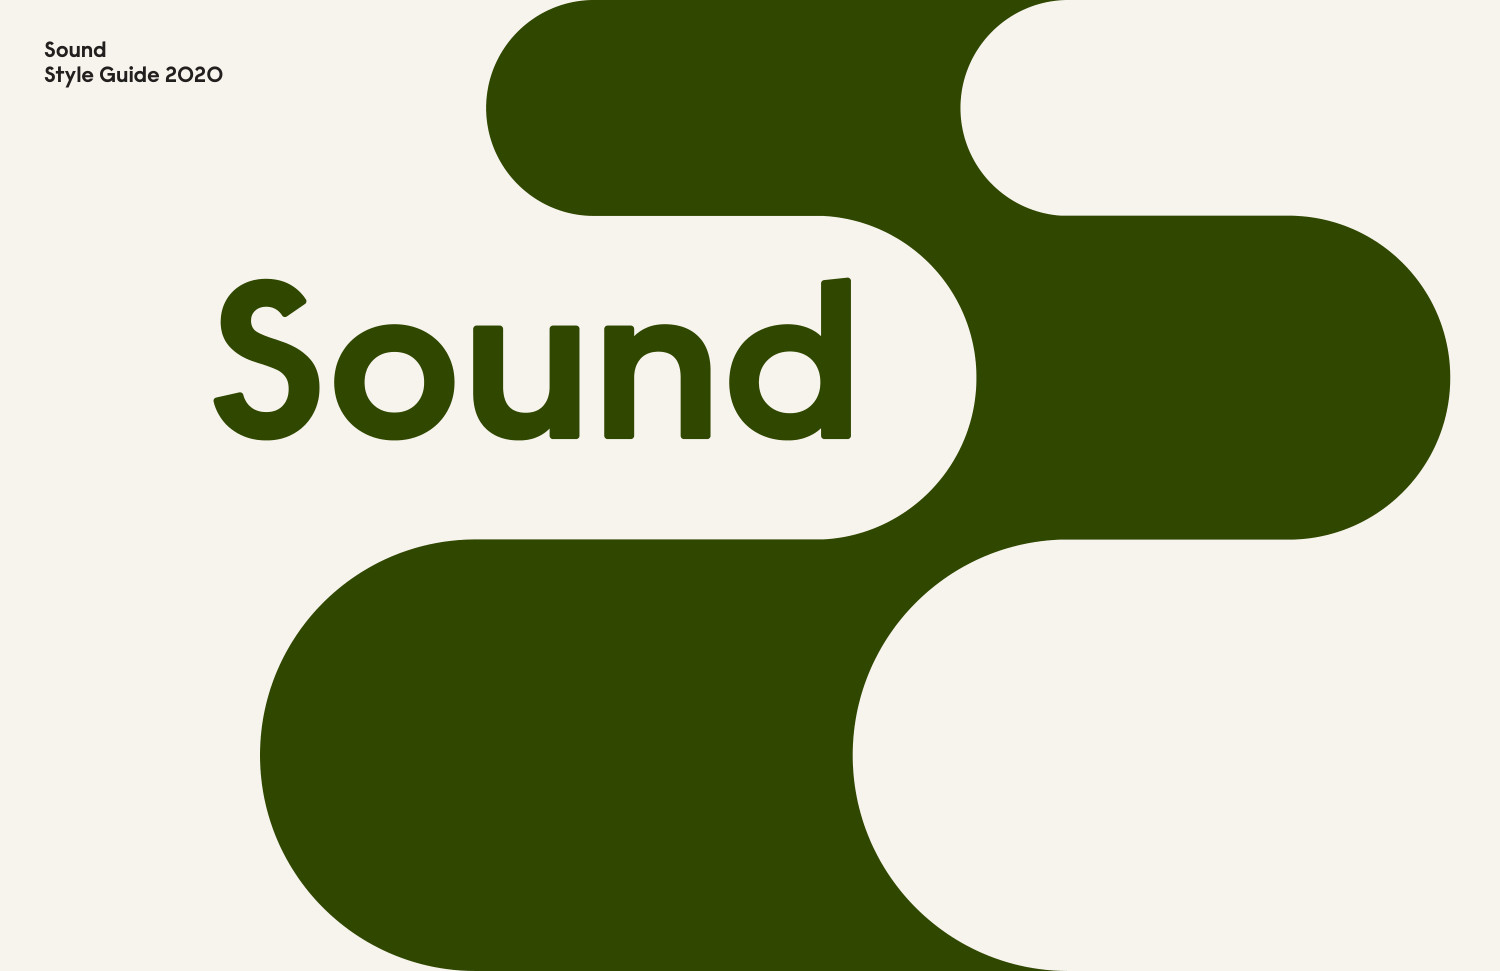 Sound Style Guide_092820.pdf | DocDroid